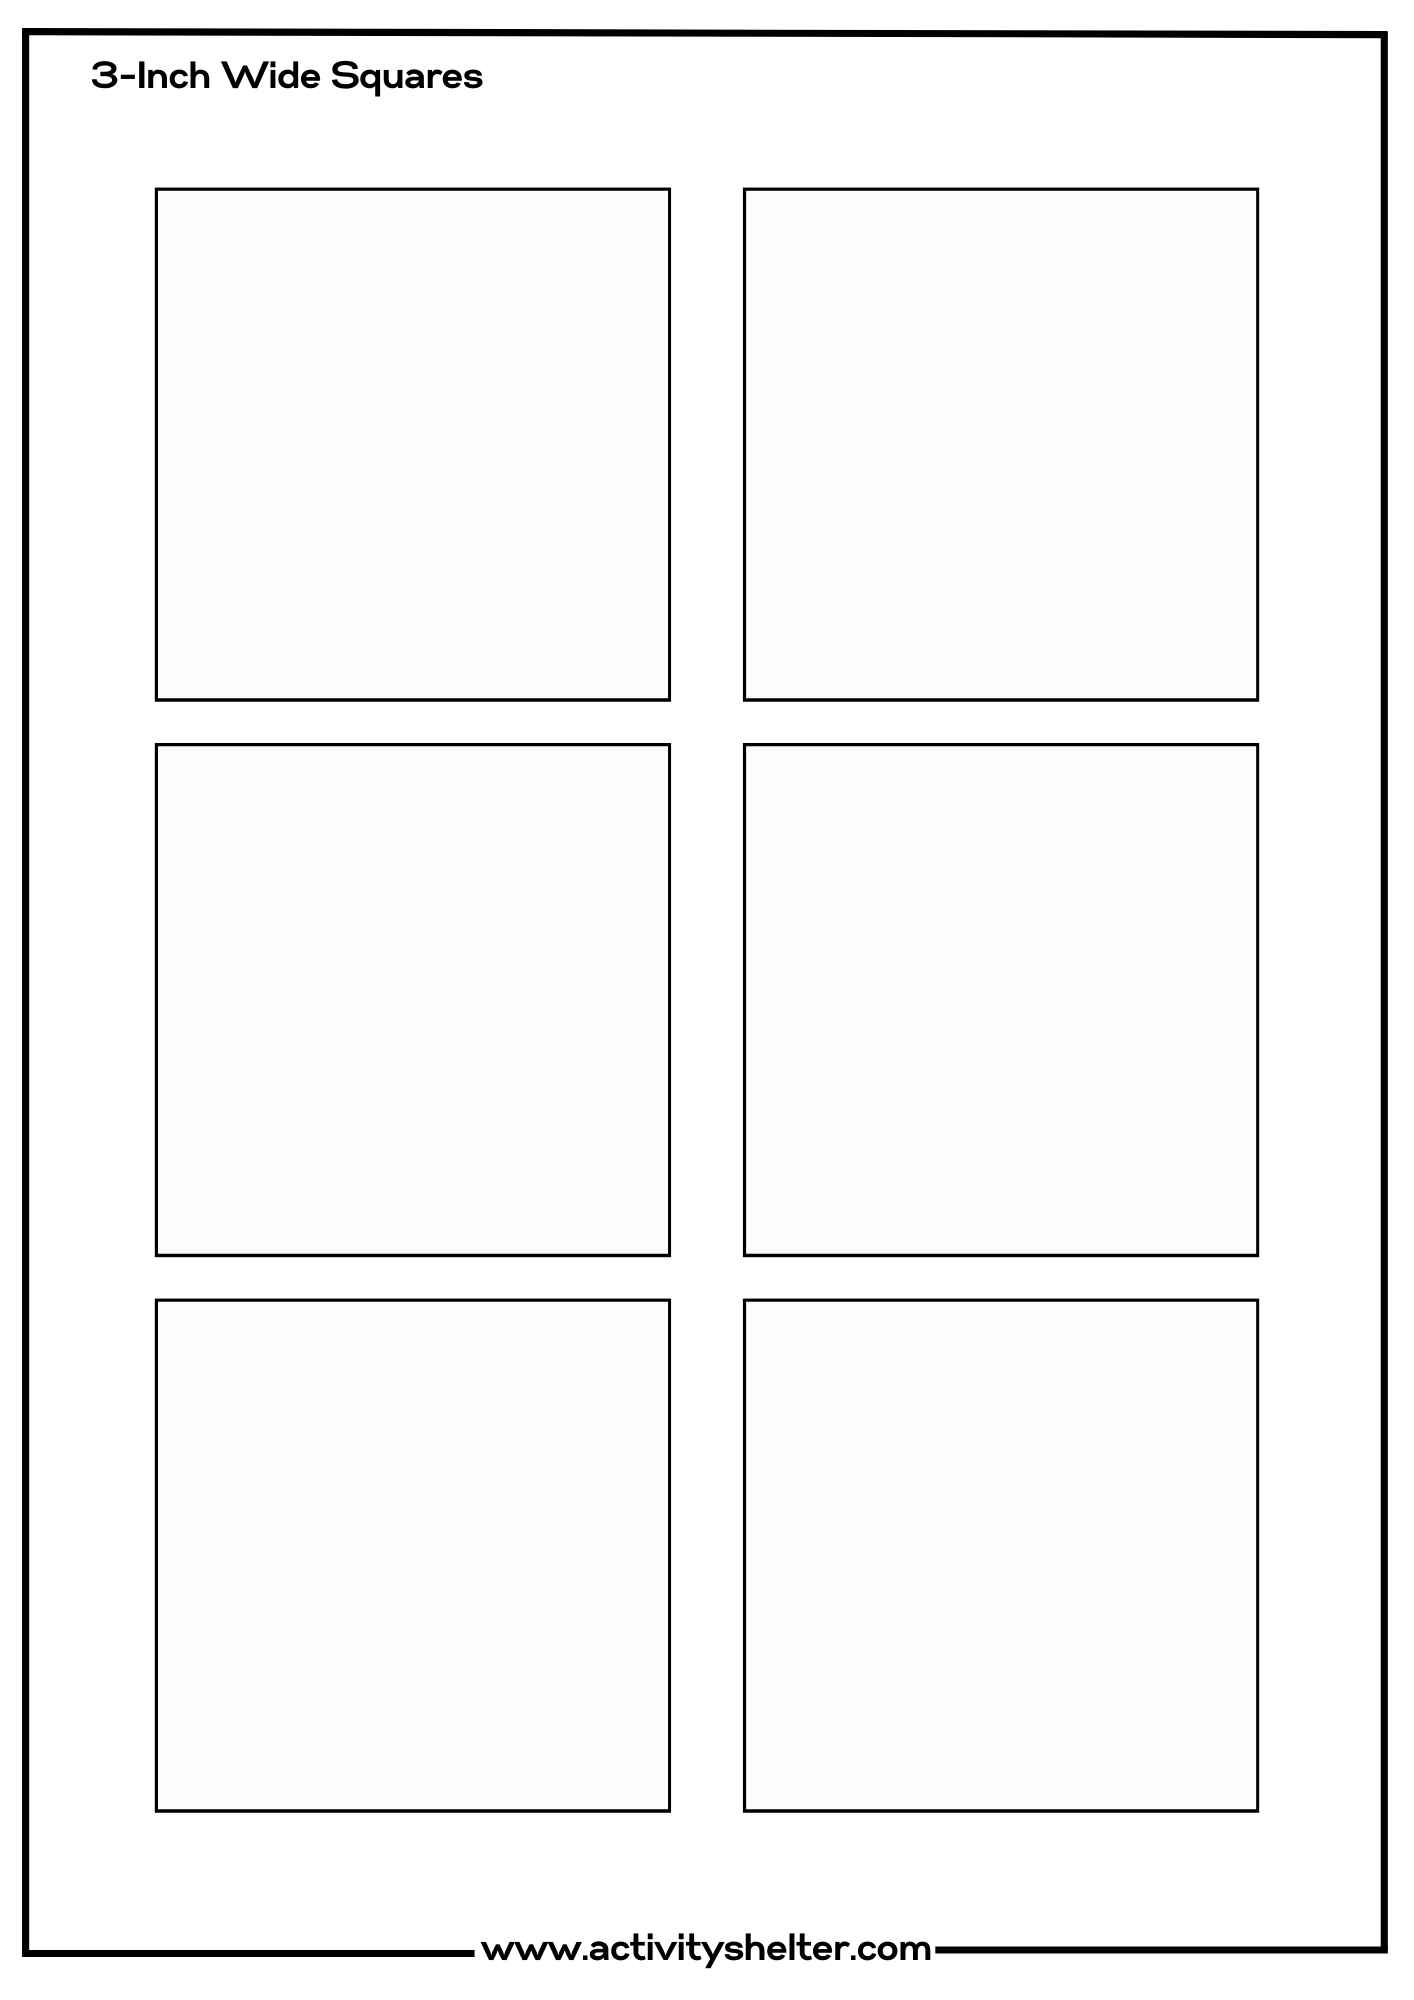 Printable Square Template 3-Inch Wide